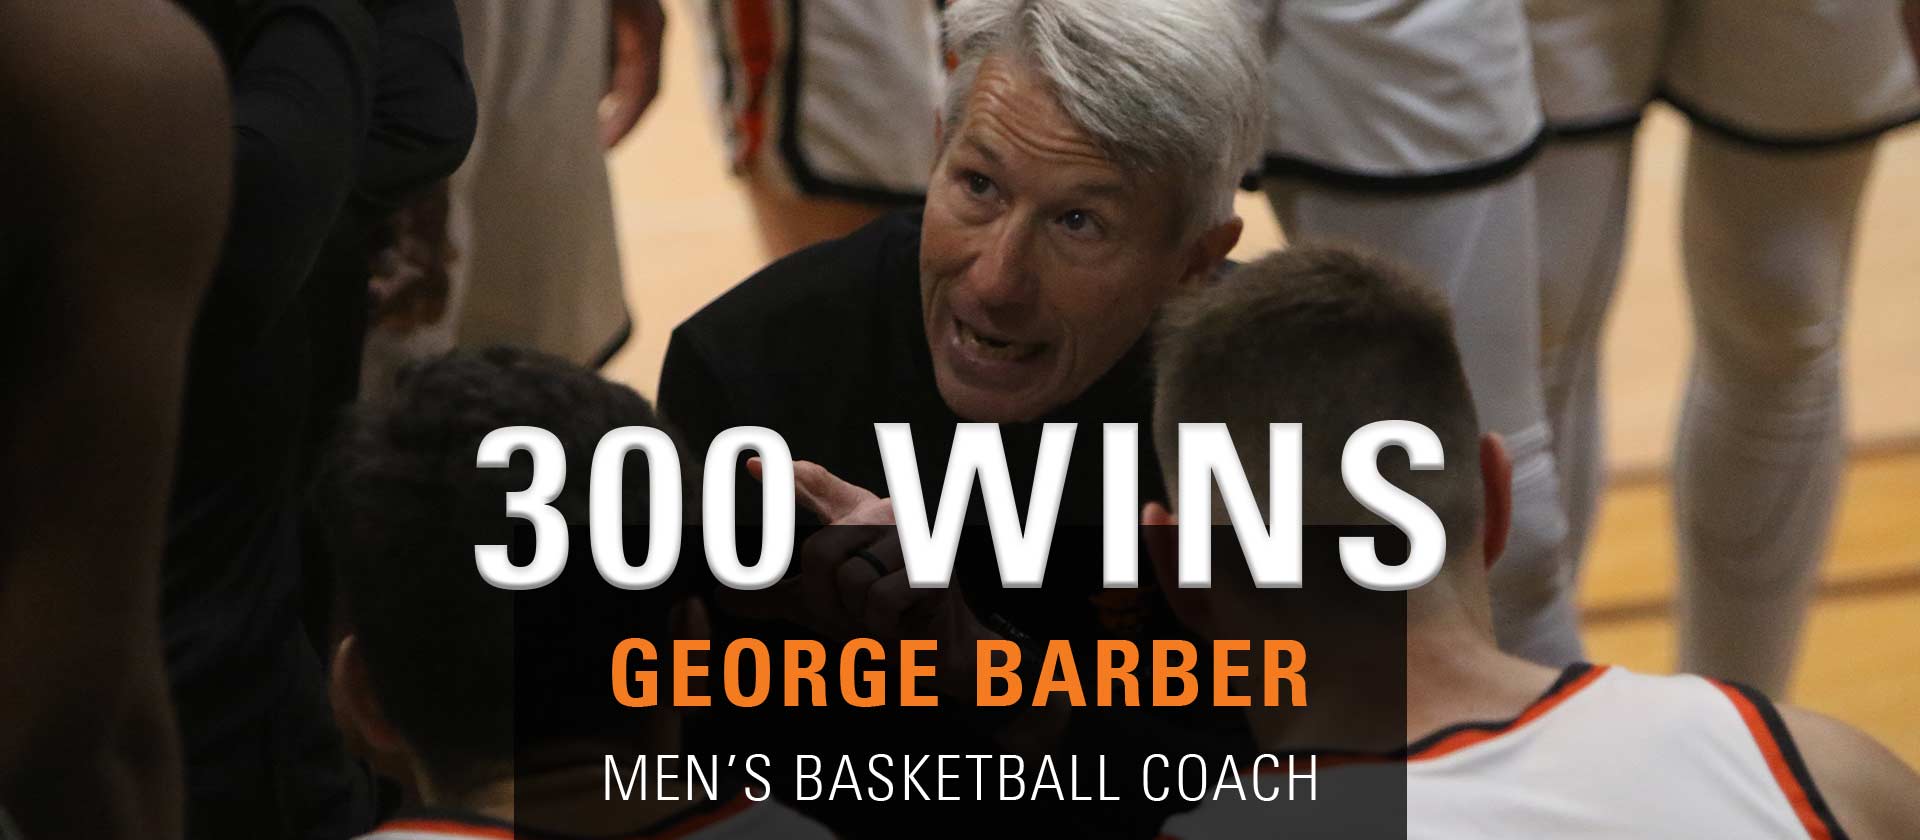 Barber Reaches 300 Wins